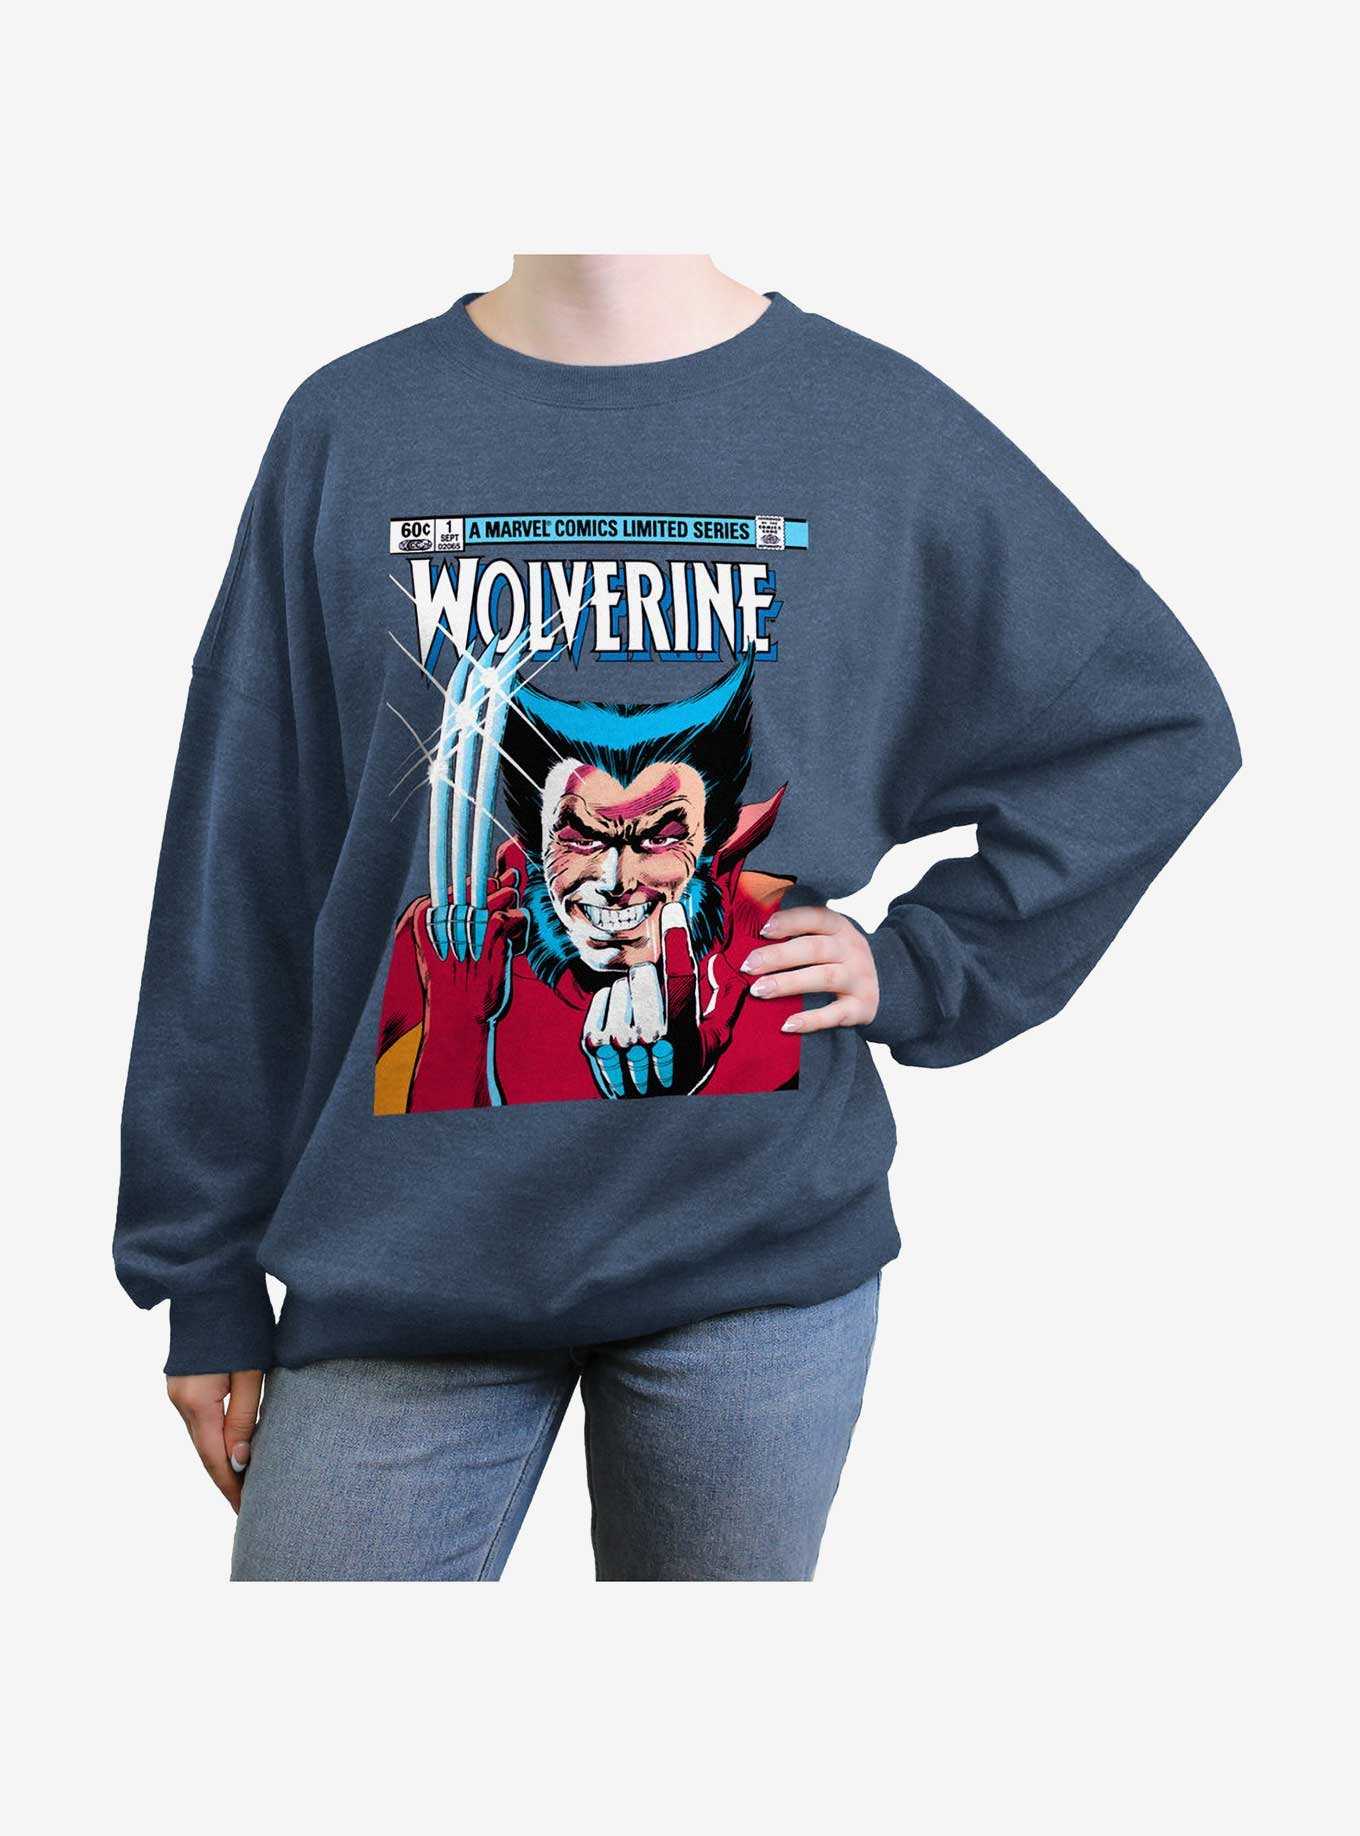 Wolverine 1st Issue Comic Cover Womens Oversized Sweatshirt, , hi-res